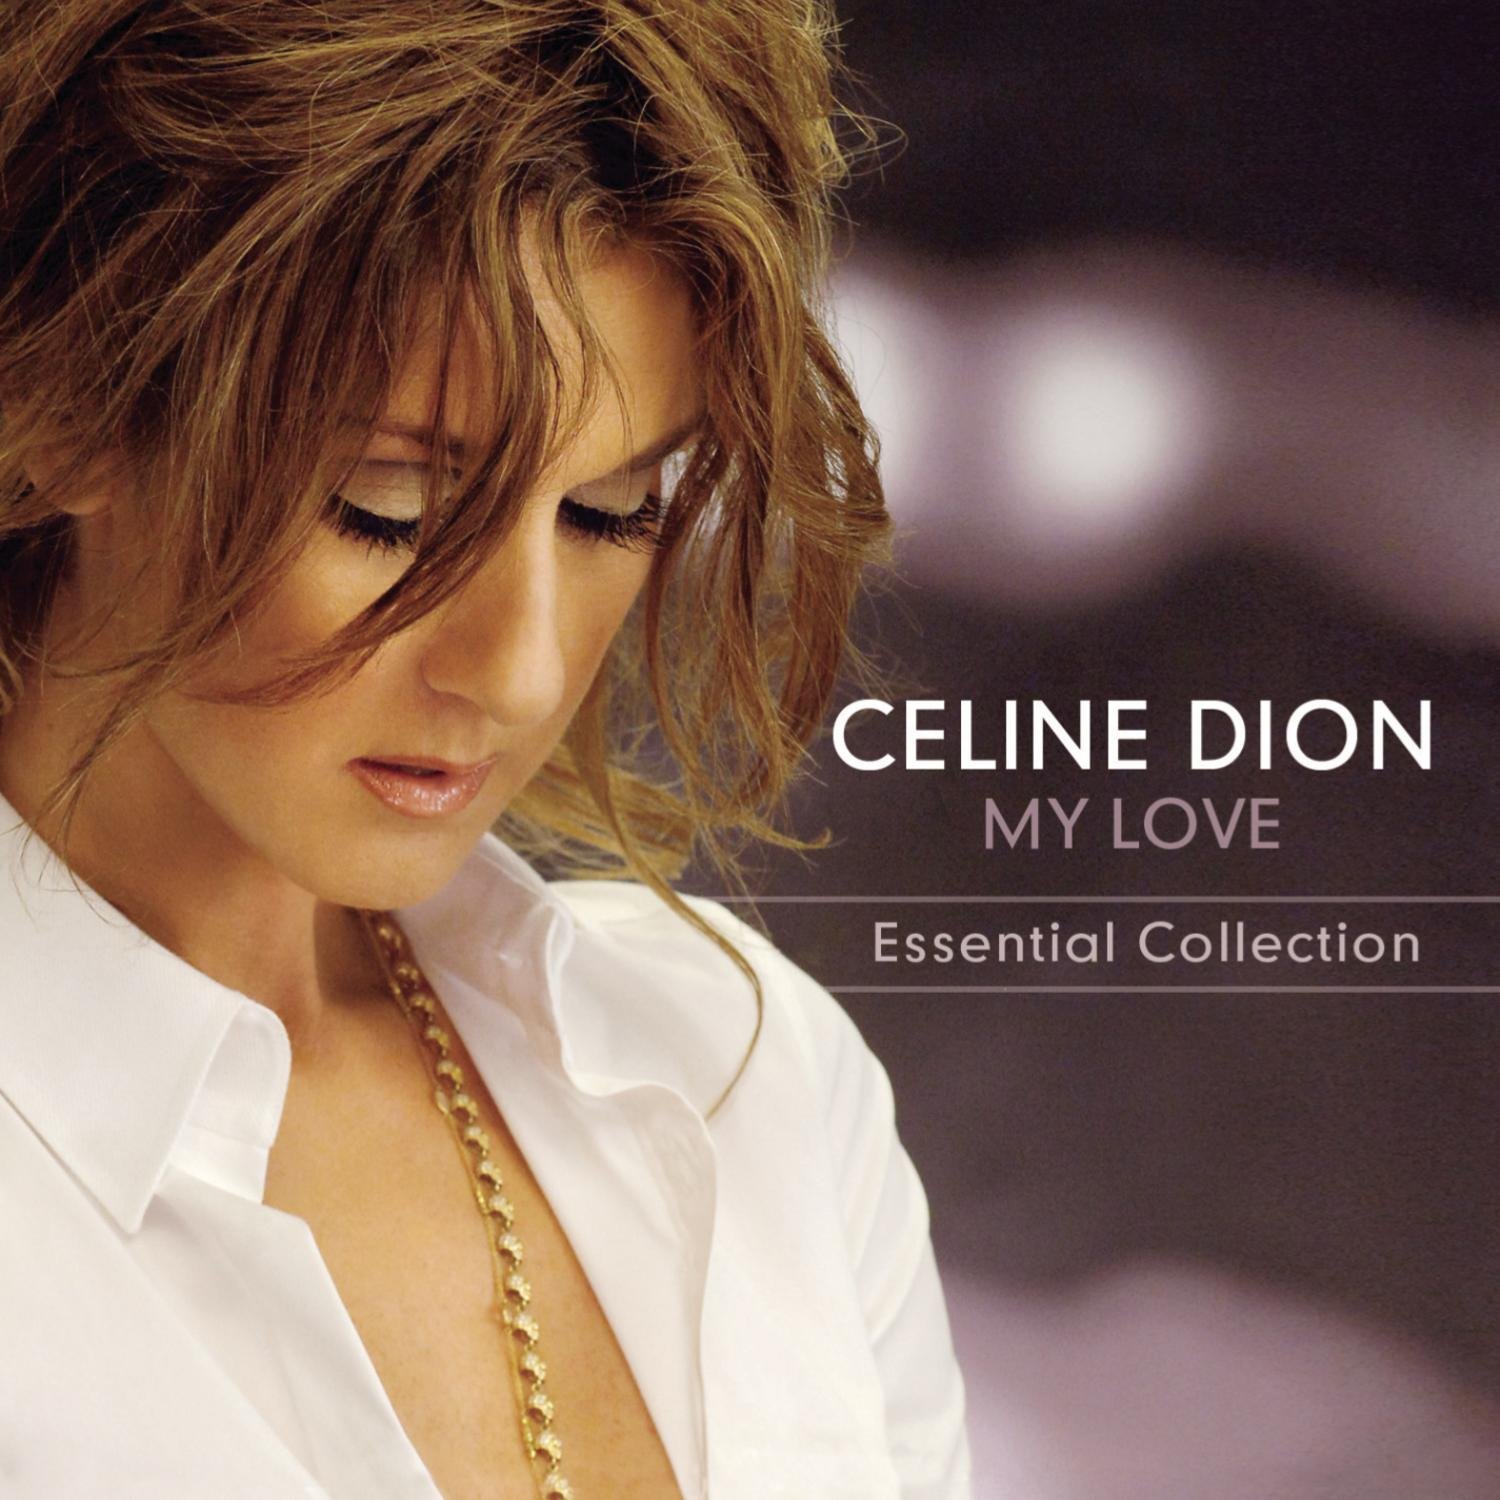 Celine Dion, My Love Essential Collection, CD